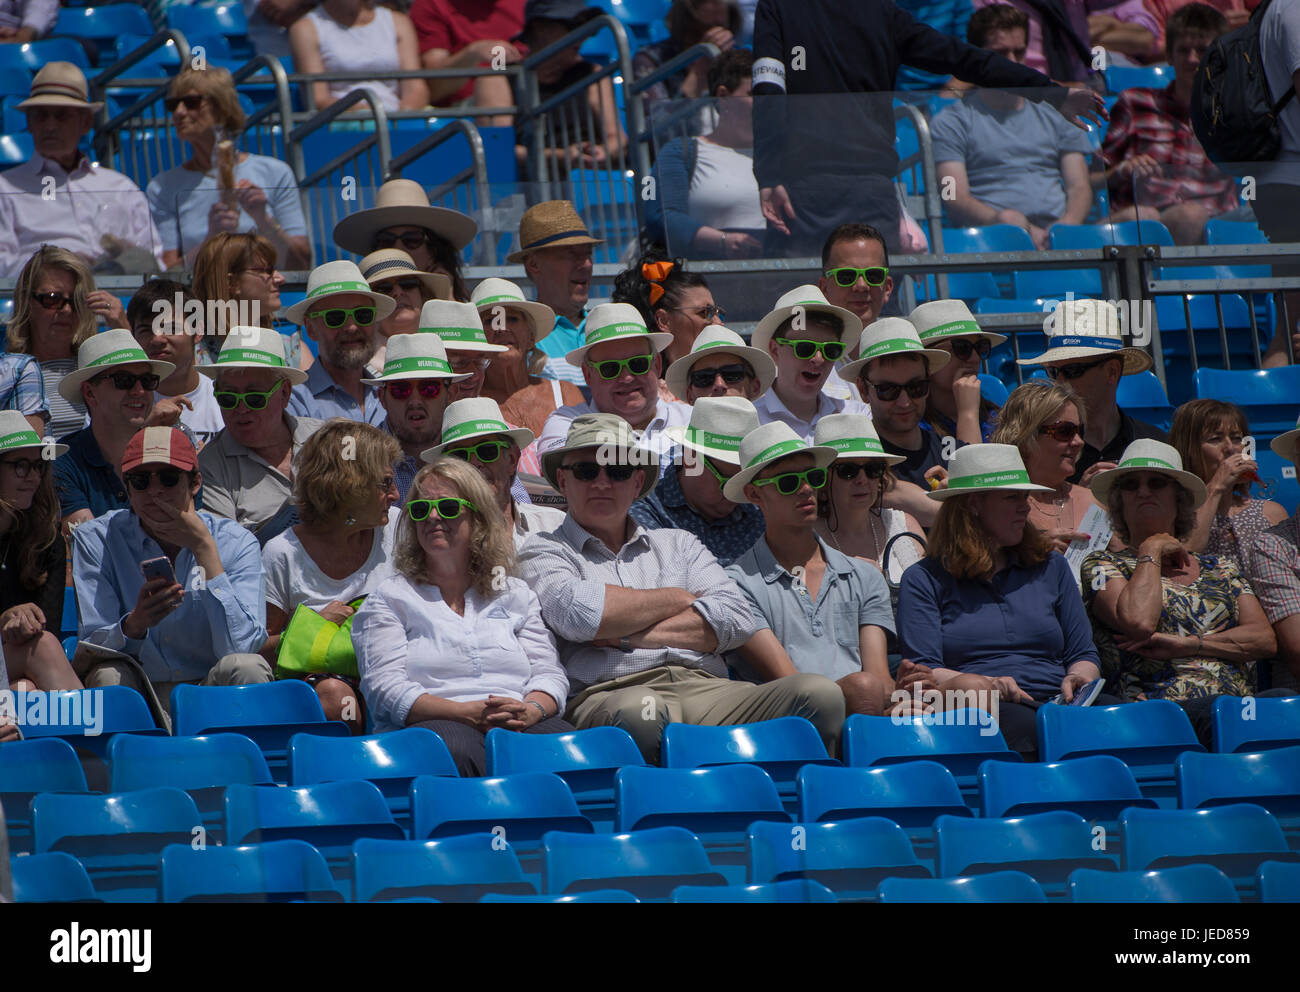 The Queen's Club, London, UK. 23rd June, 2017. Day 5 of the 2017 Aegon Championships, centre court action with Sam Querry (USA) v Gilles Muller (LUX). Spectators with corporate straw hats. Credit: Malcolm Park/Alamy Live News. Stock Photo